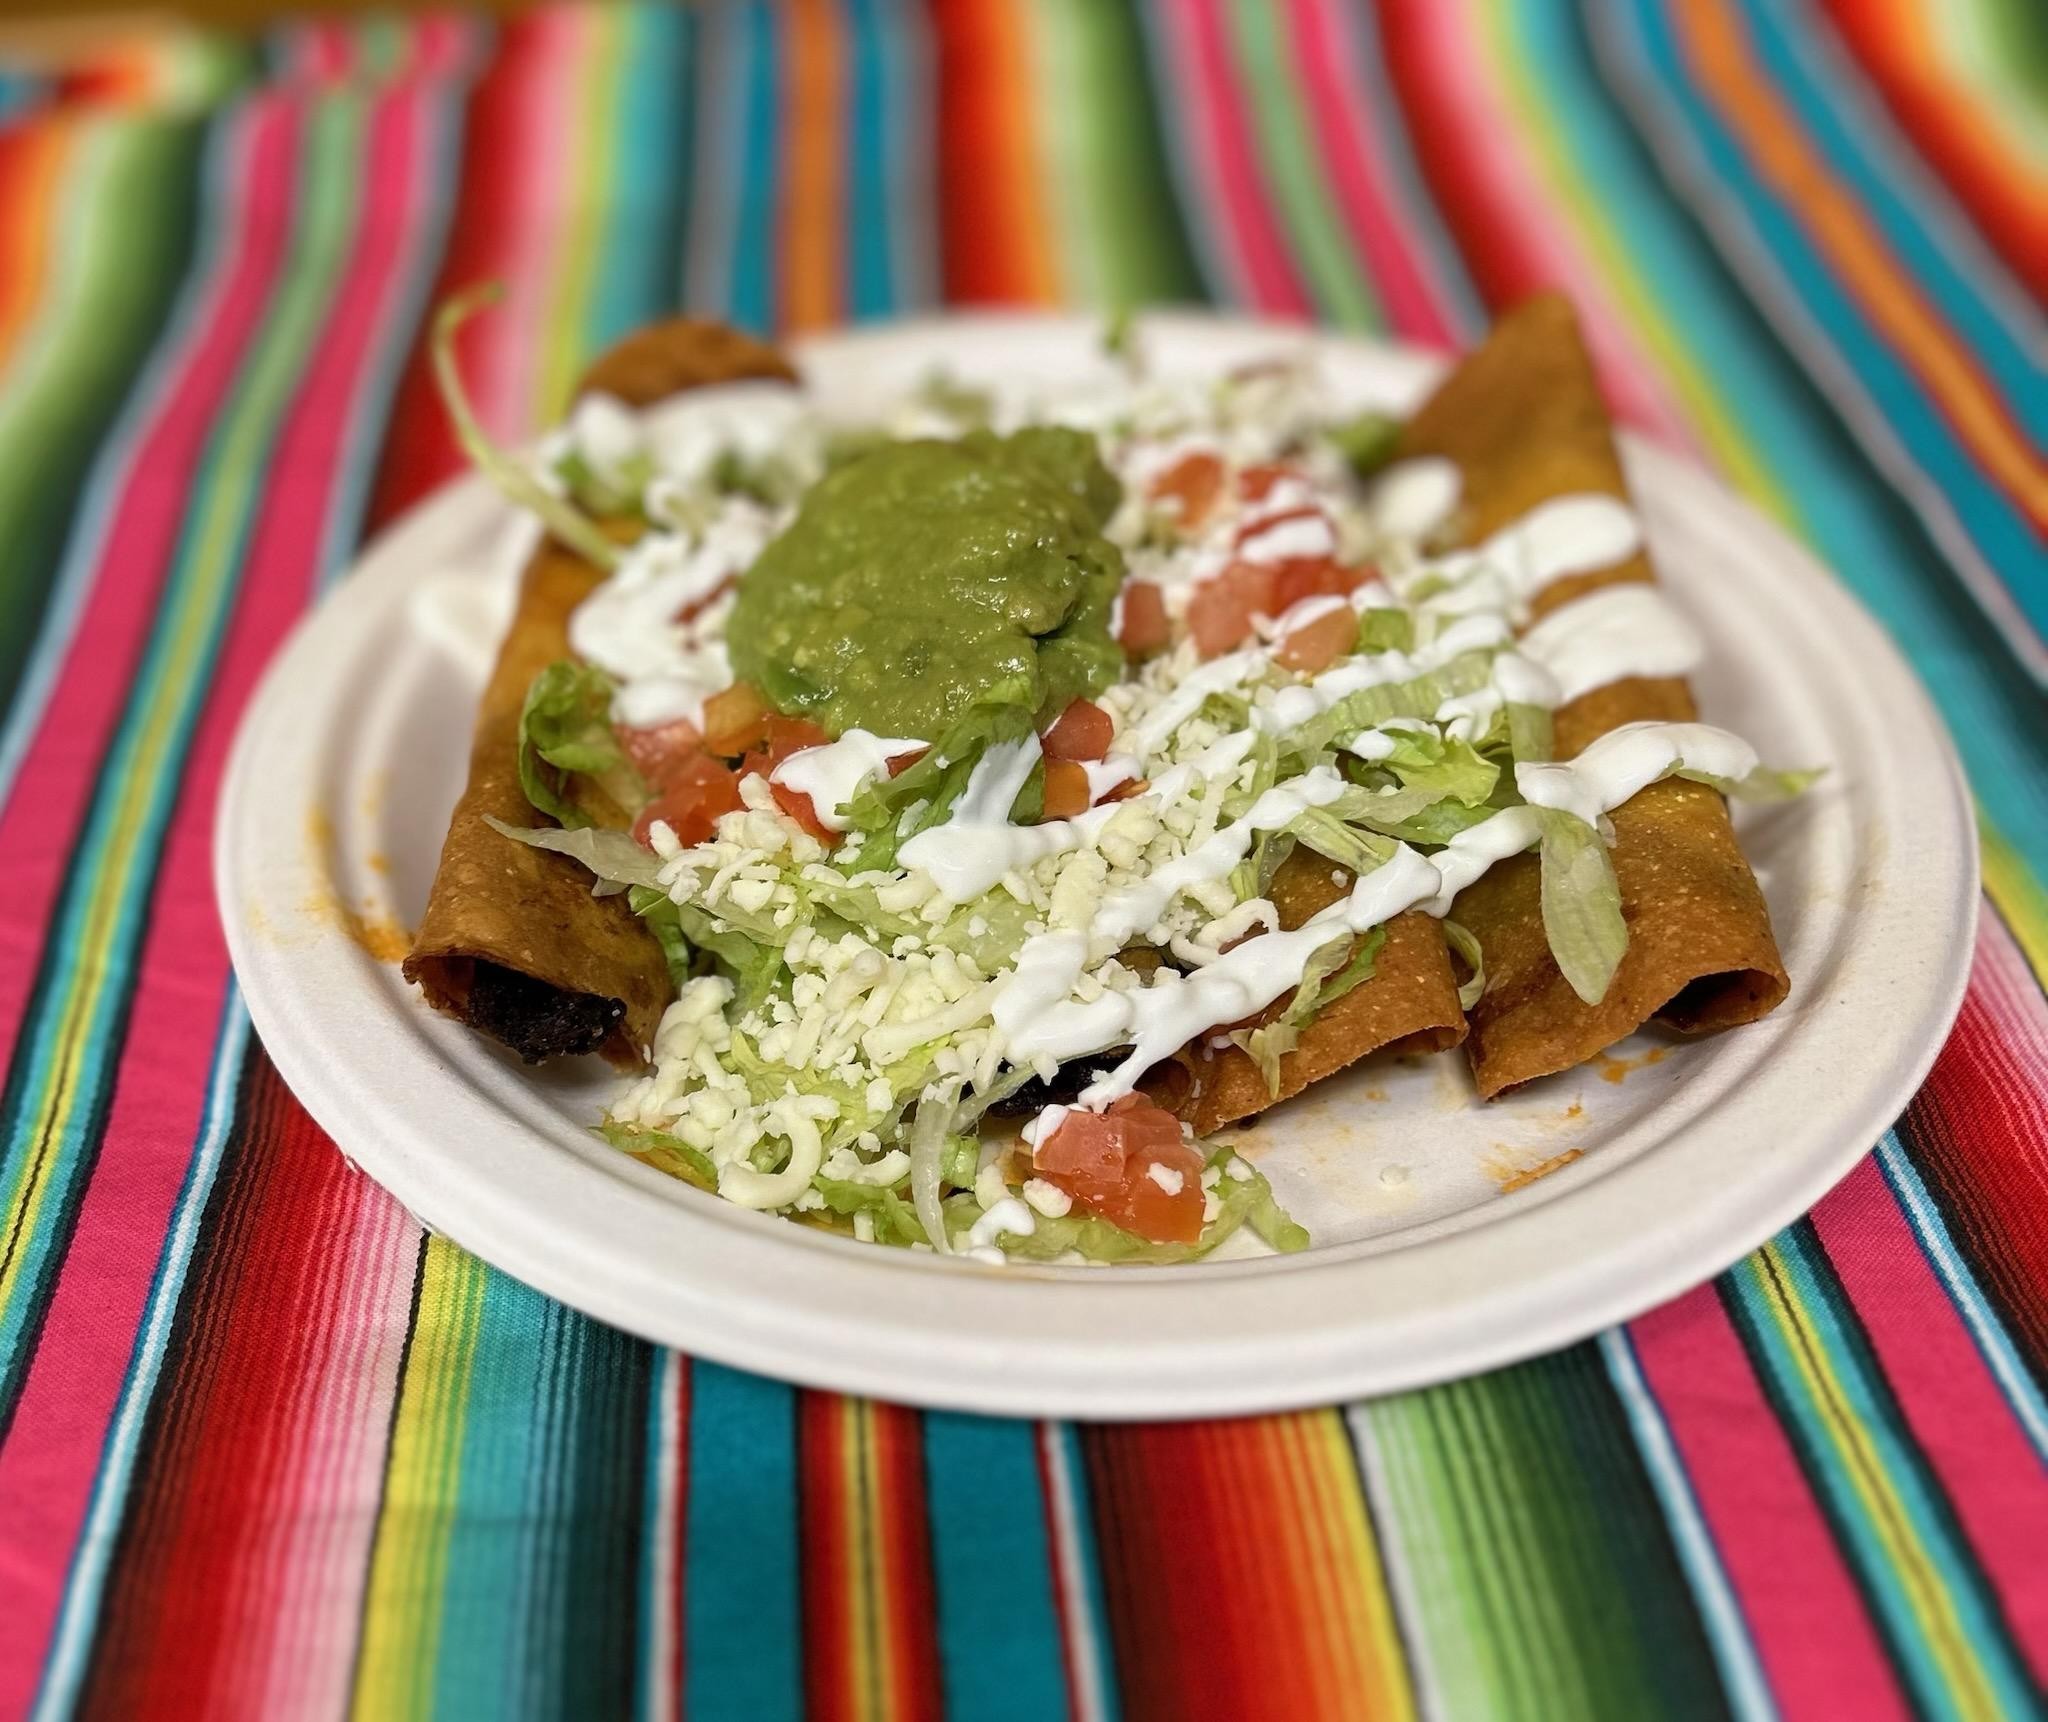 taquitos (lettuce, tomatoes, cheese, sour cream and guacamole)